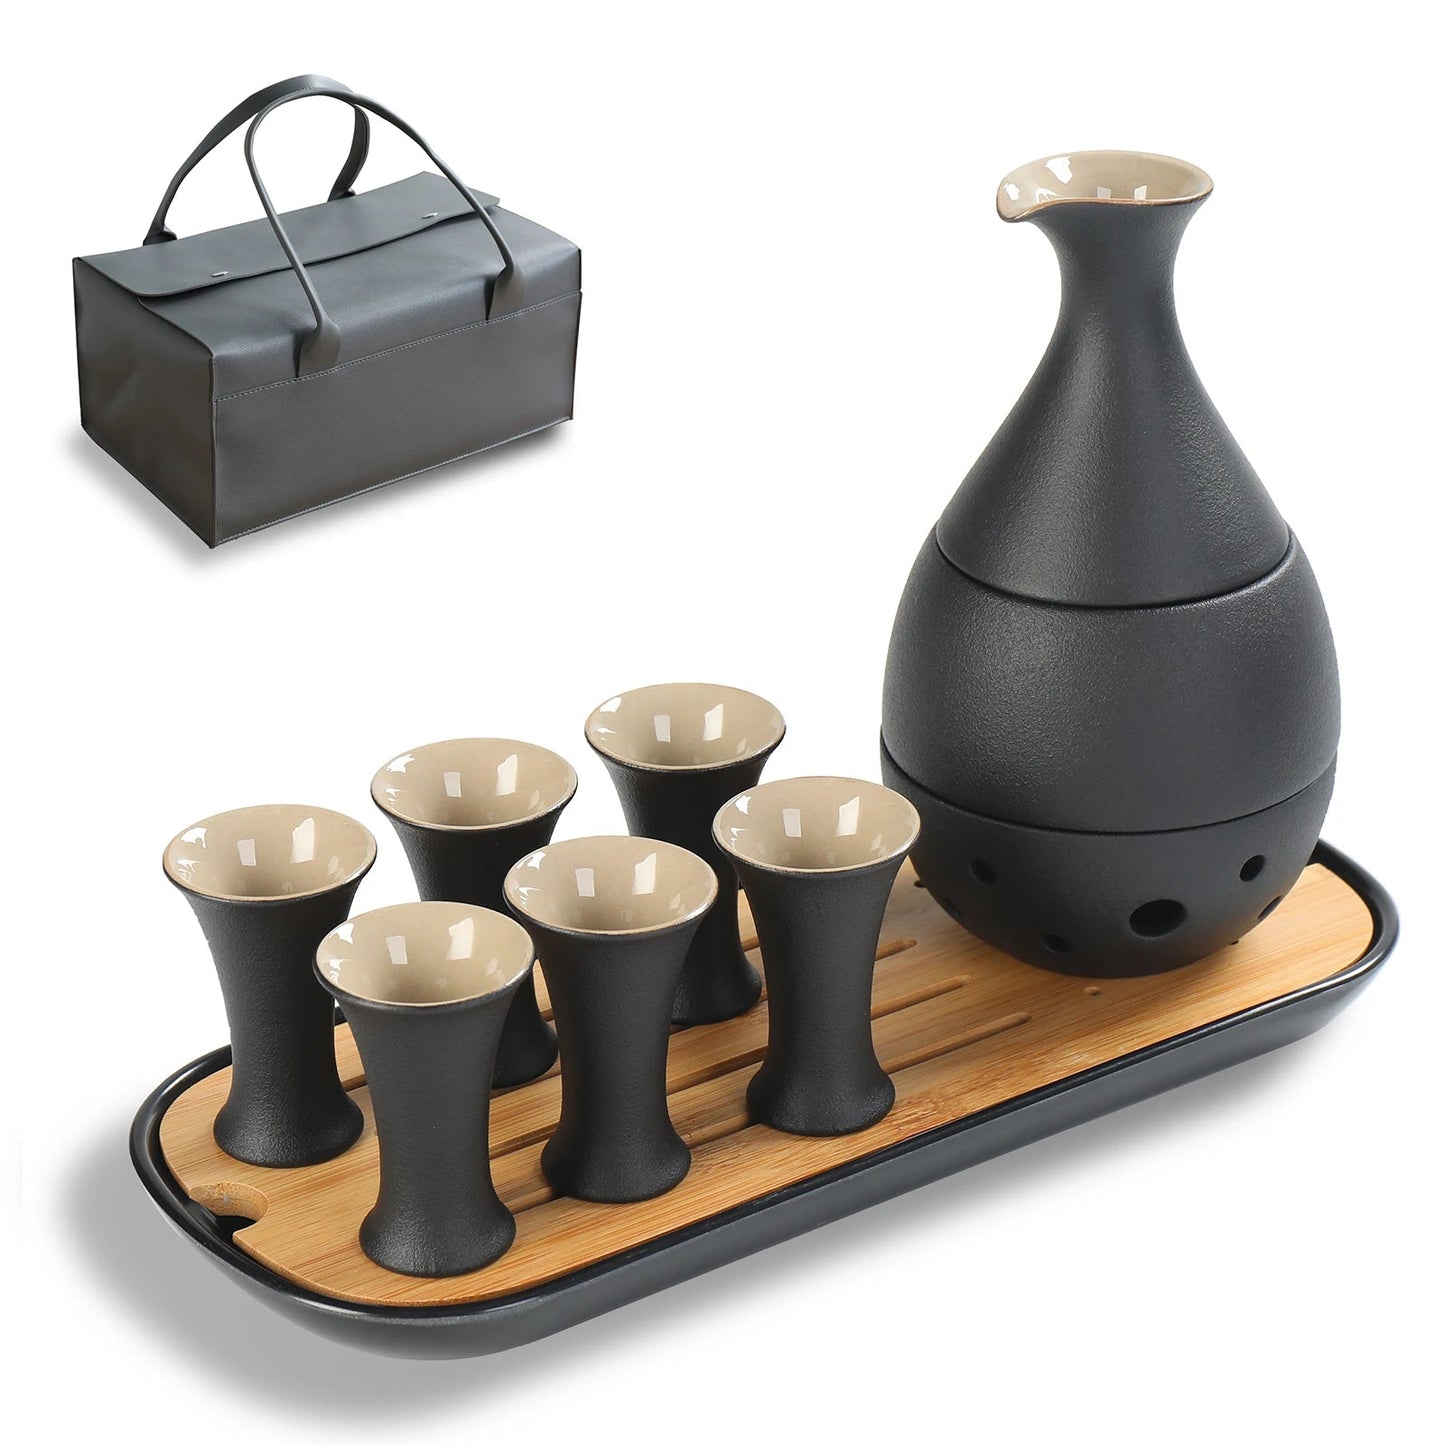 https://www.teanagoo.com/cdn/shop/products/TEANAGO_Ceramic_Sake_Set_with_warmer_10pcs_available_2_packing_options-1_08554c16-8ee3-4a74-9e17-8c235f09e009.jpg?v=1662111861&width=1445